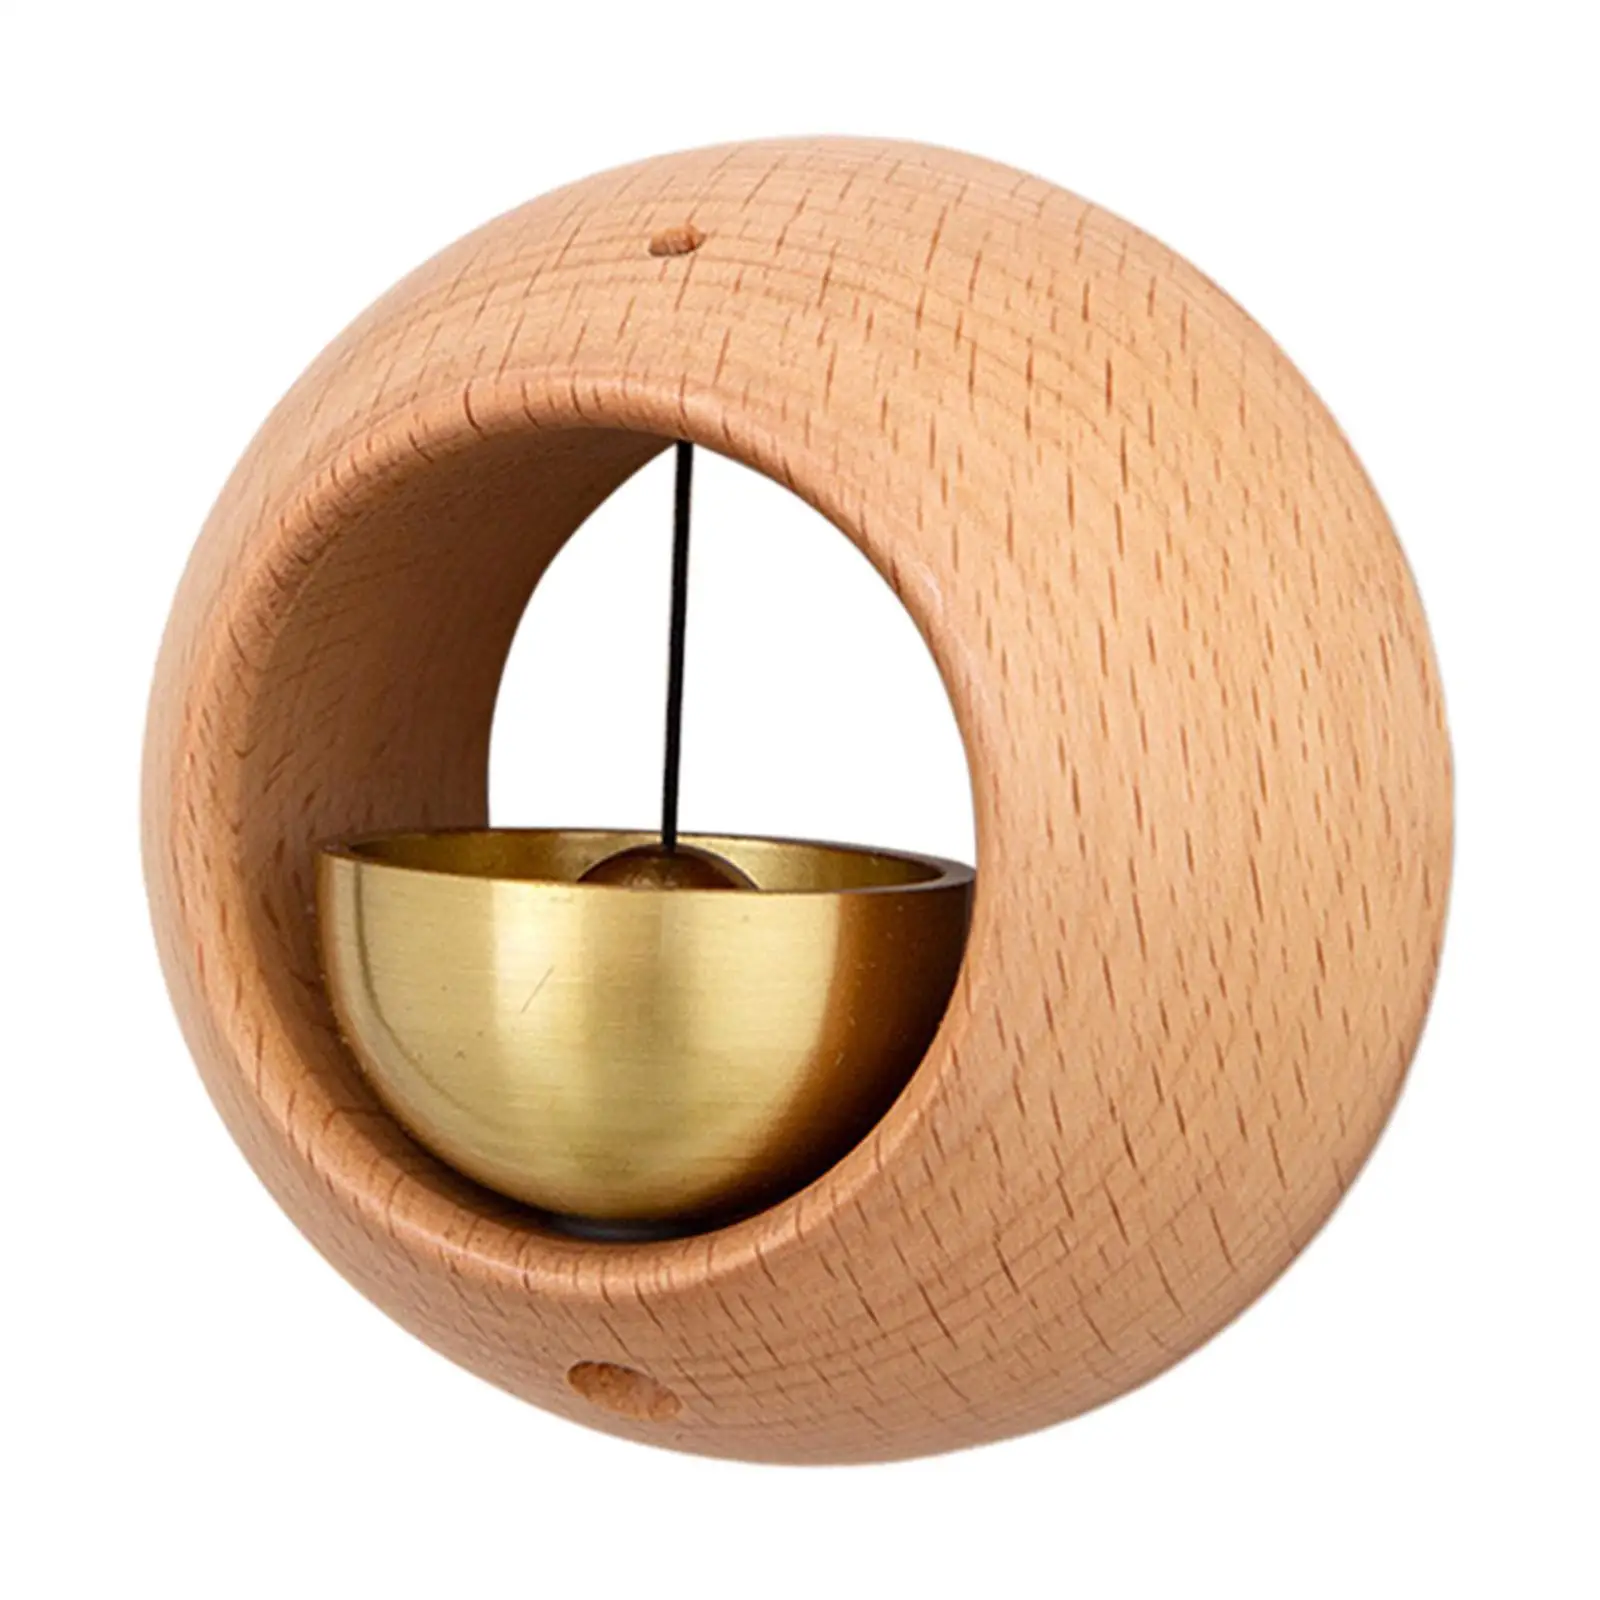 Shopkeepers Bell Welcome Wind Chime Round Small Decorative Wooden Door Bell Doorbell Ornament for Backyard Office Fridge Barn